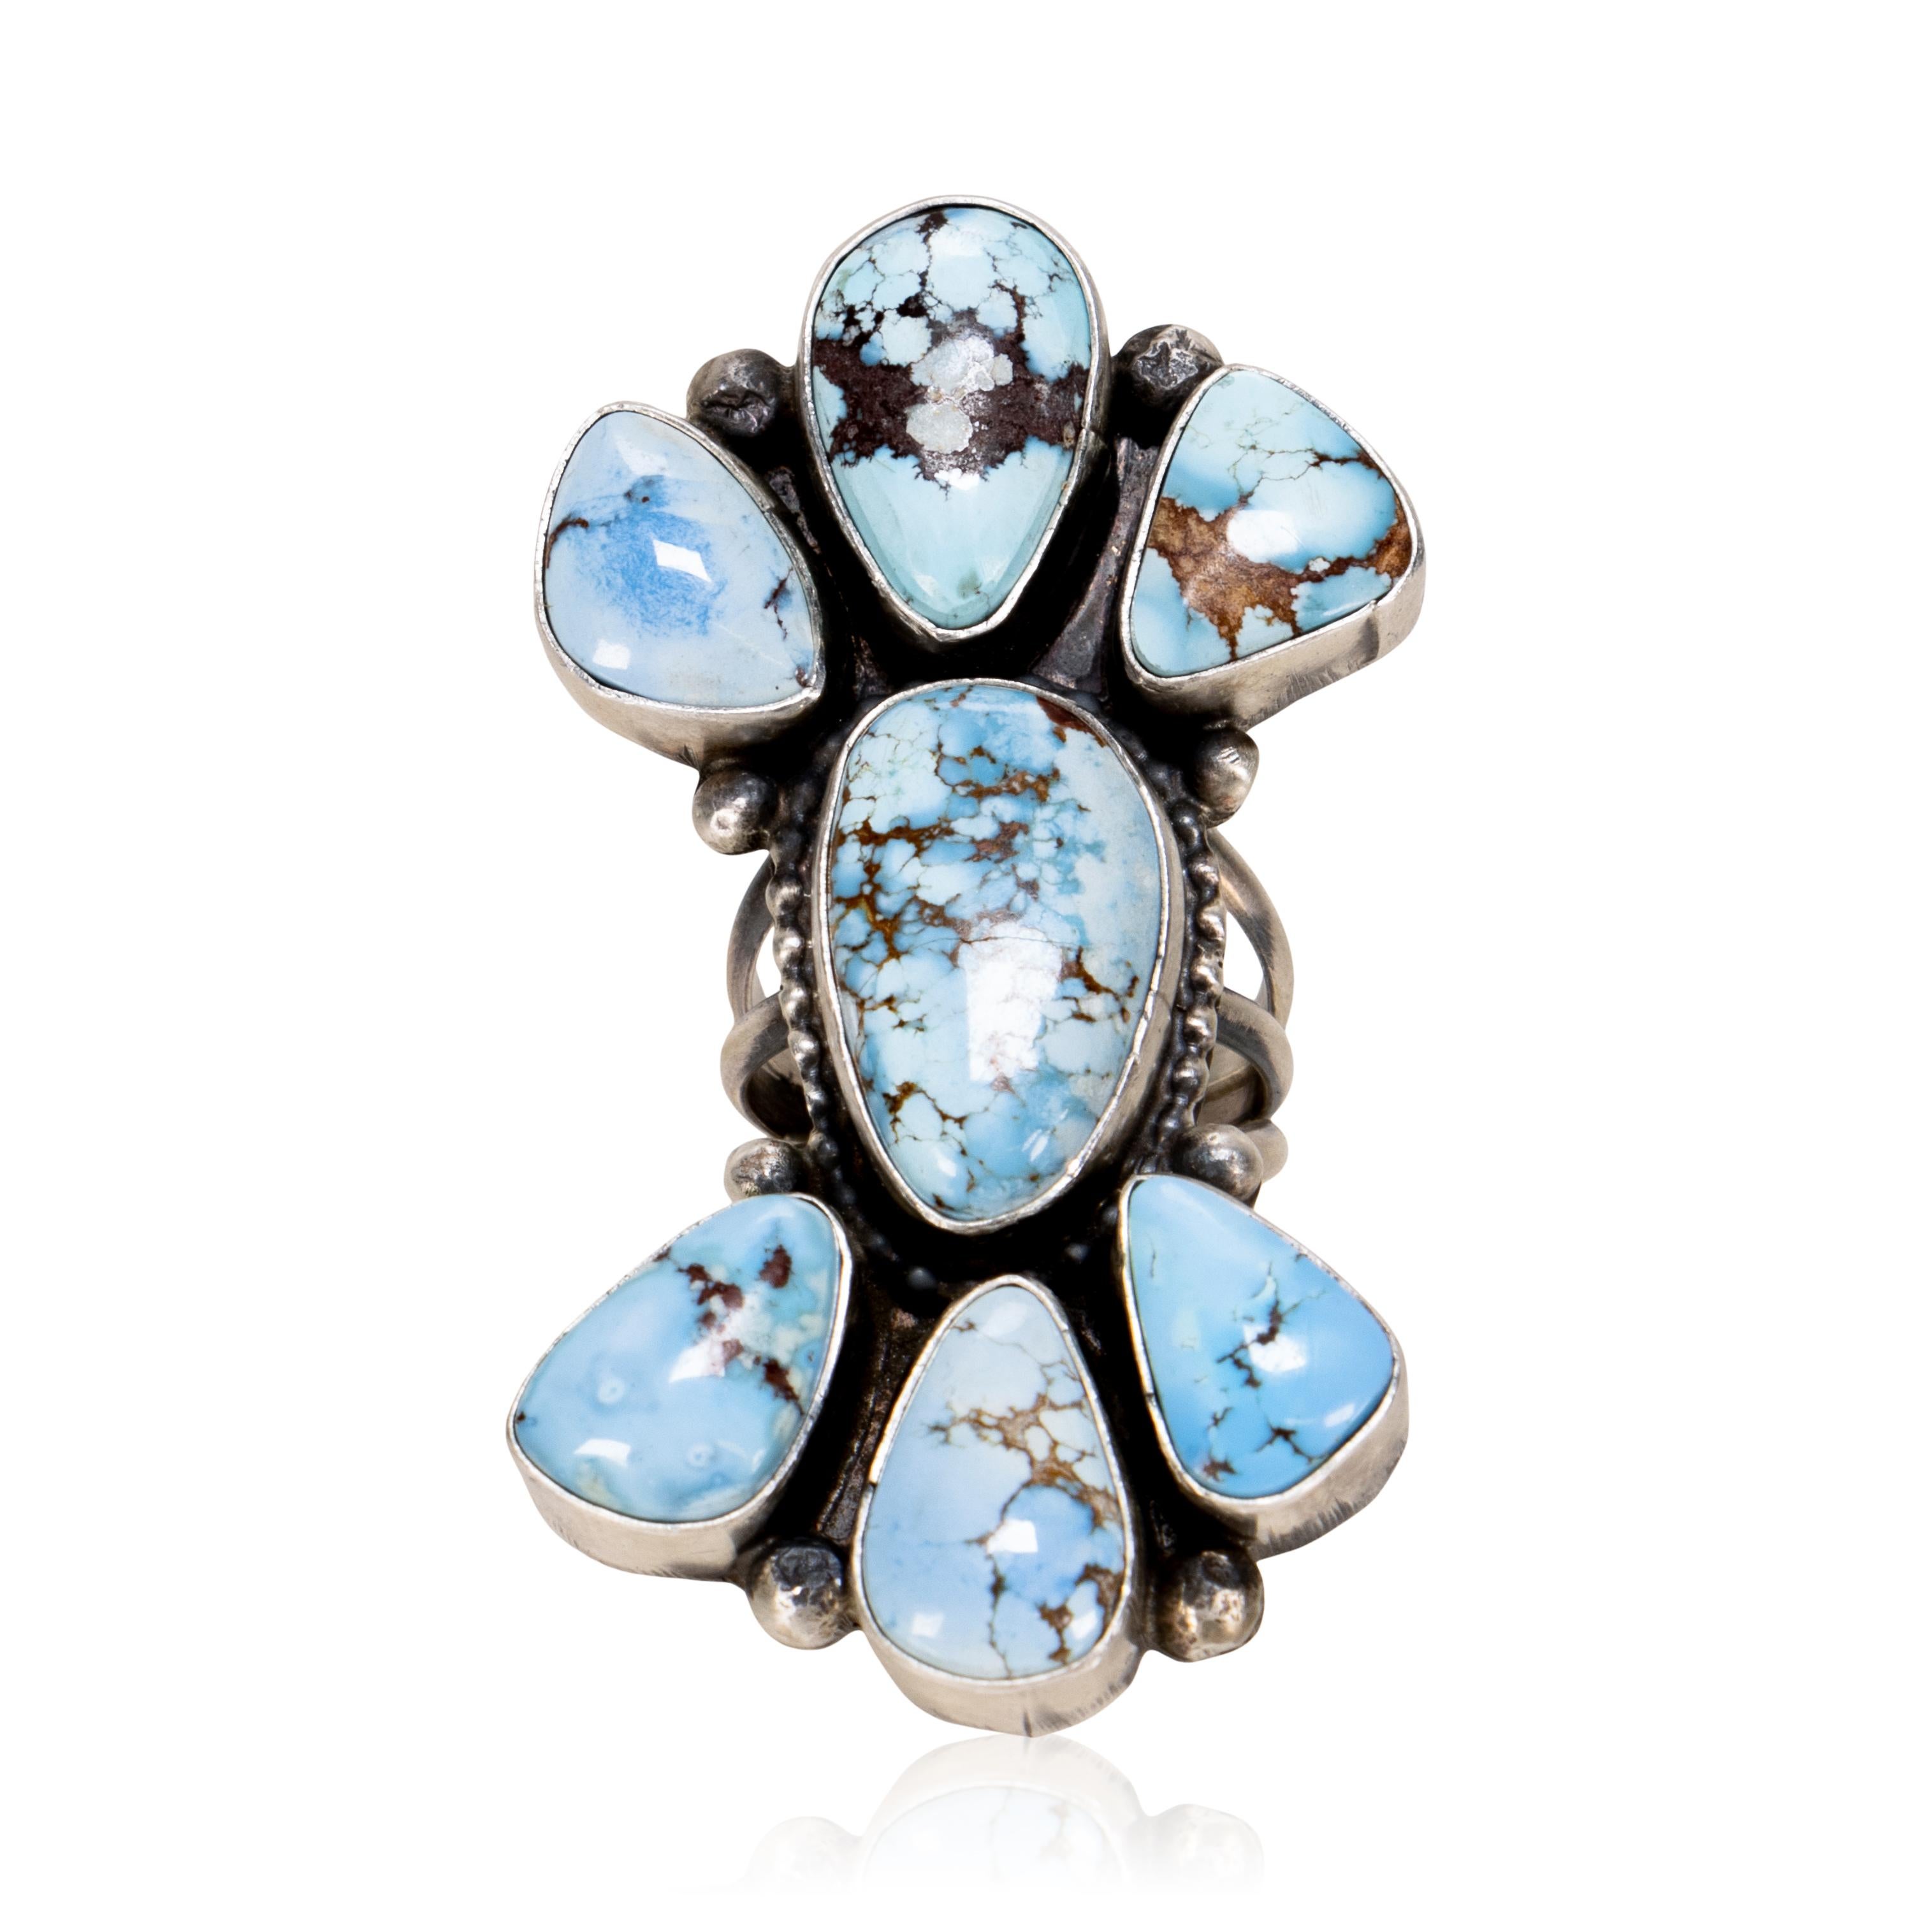 Massive, one of a kind, custom Native American Navajo sterling silver, and highly collectible gem grade Golden Hills turquoise cluster statement ring in. Features a stunning, traditional statement Navajo cluster design of a carefully selected